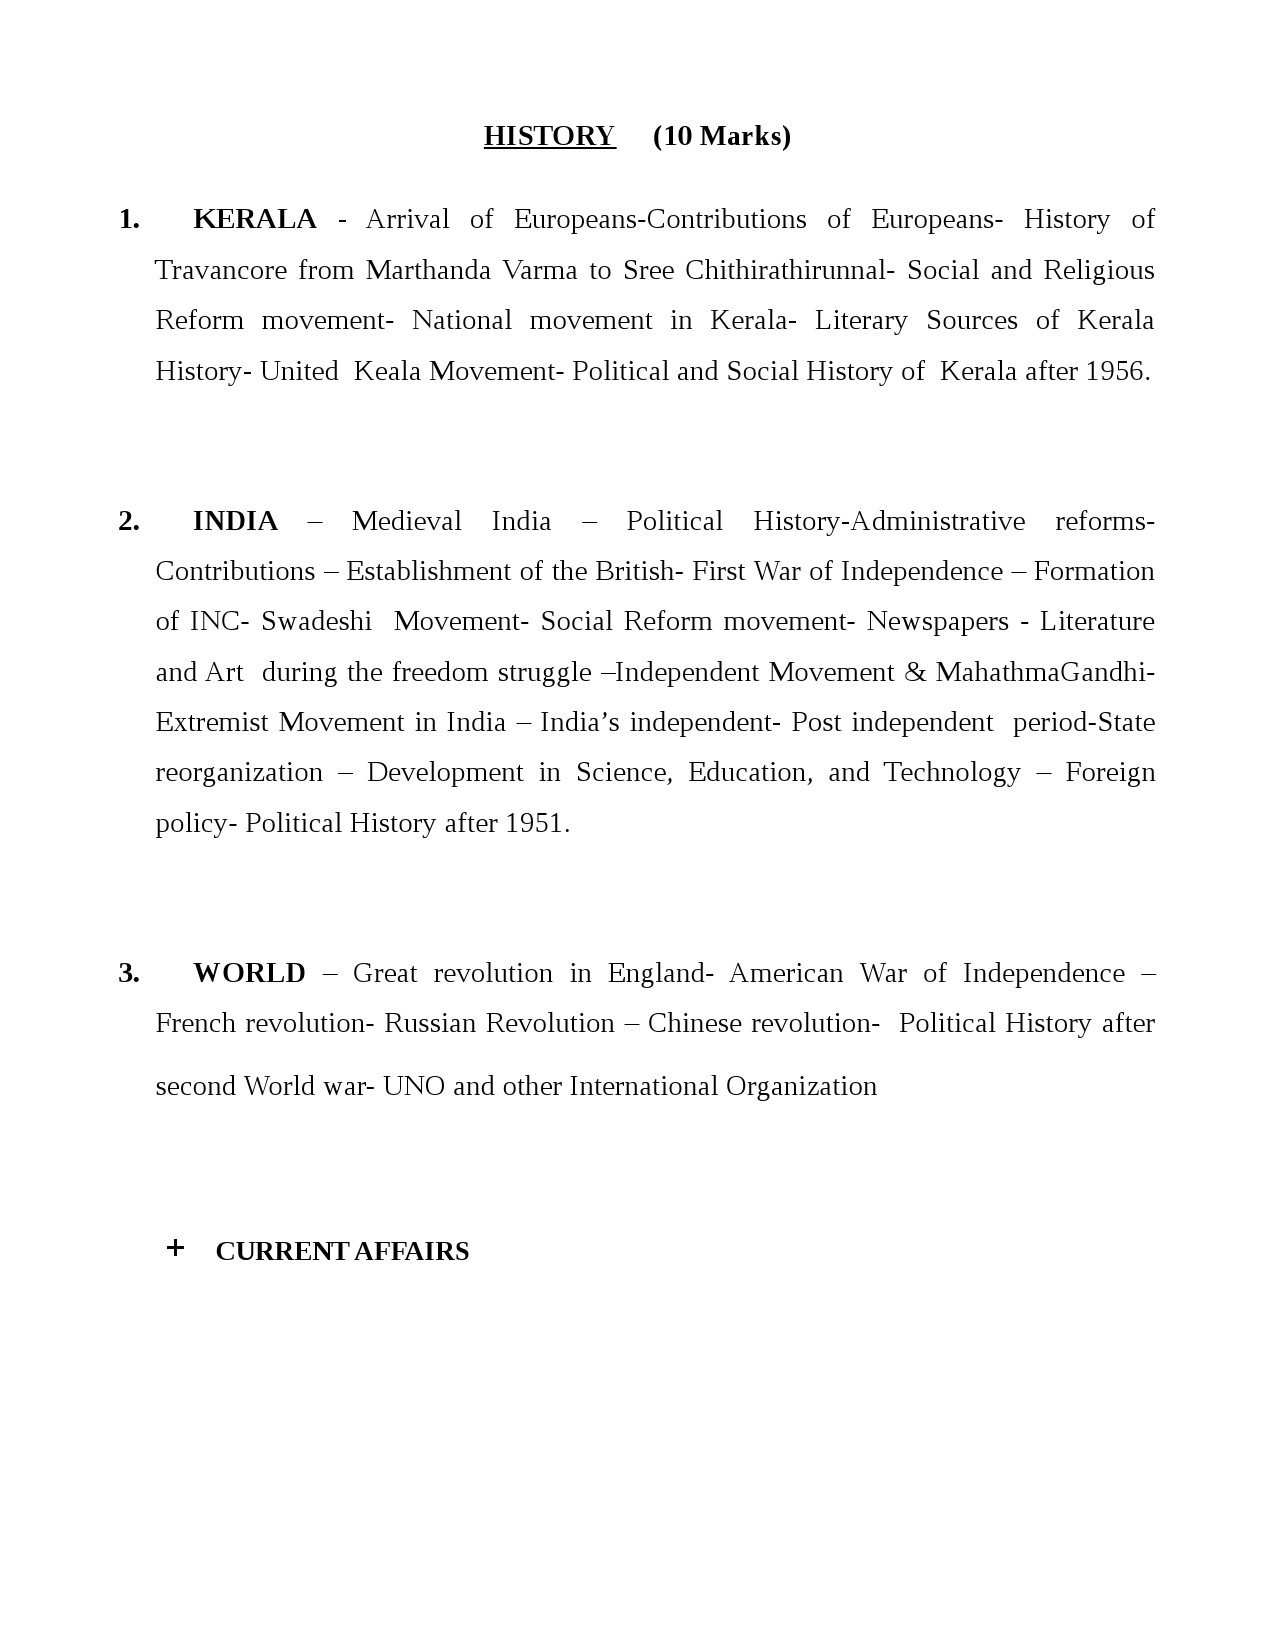 Detailed Syllabus for Common Preliminary Examination for Field Officer - Notification Image 2